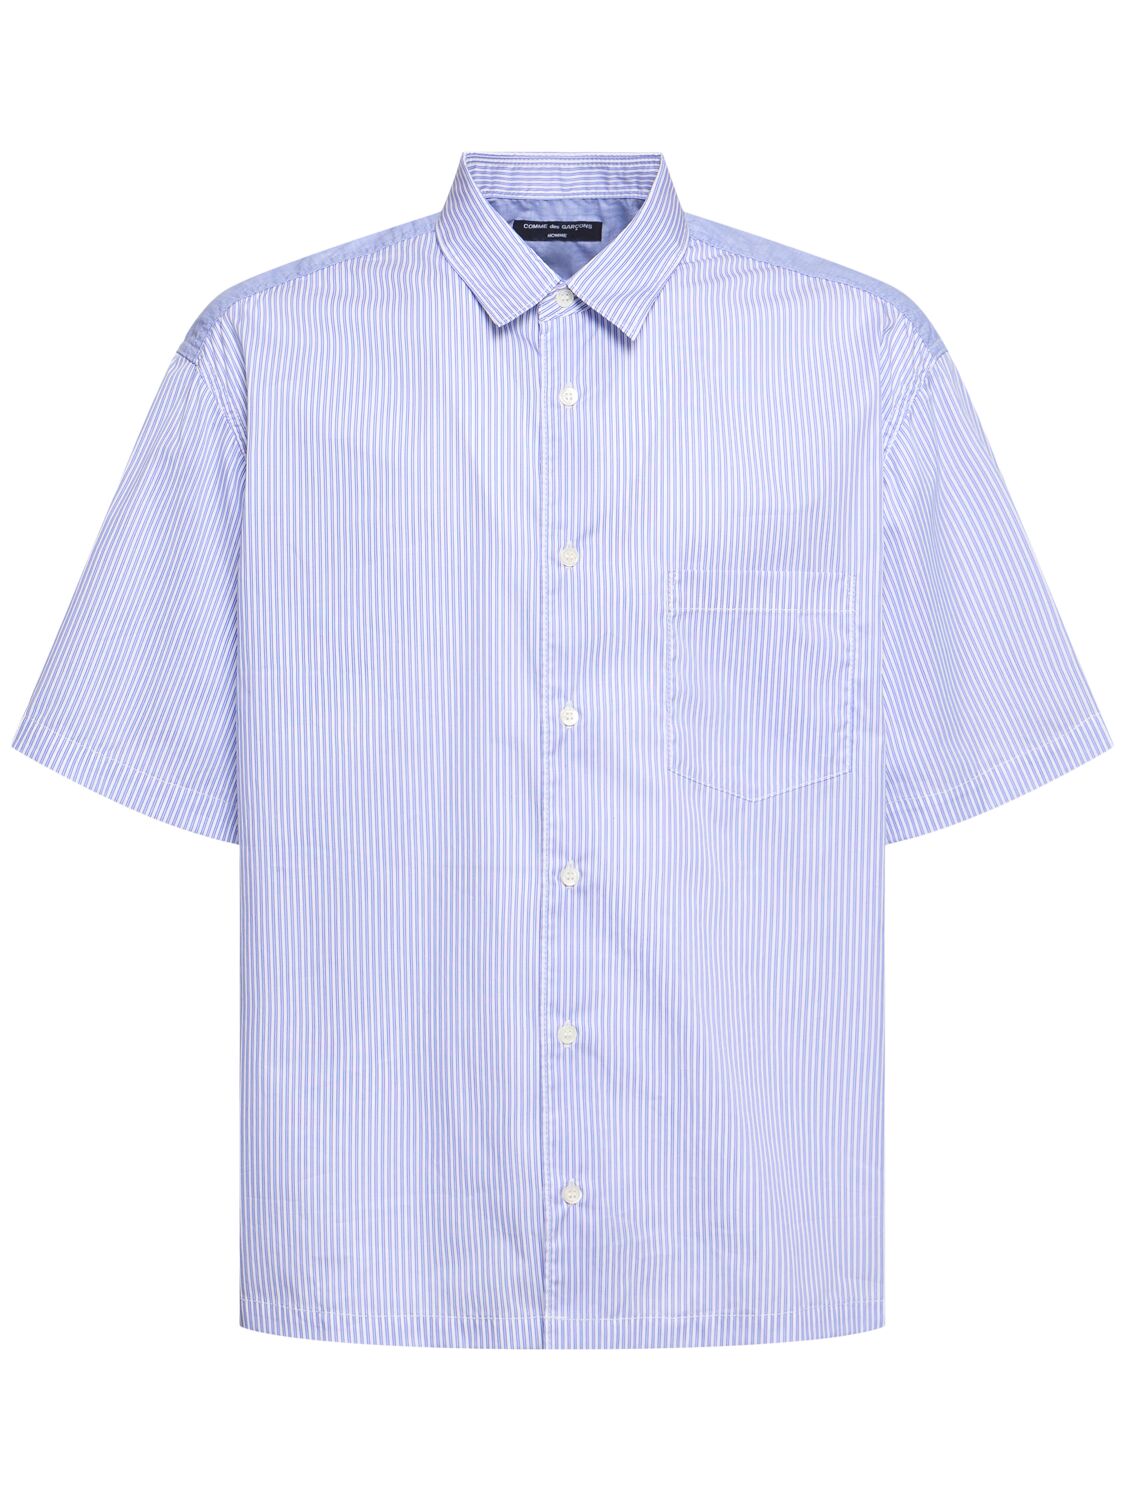 Image of Cotton S/s Shirt